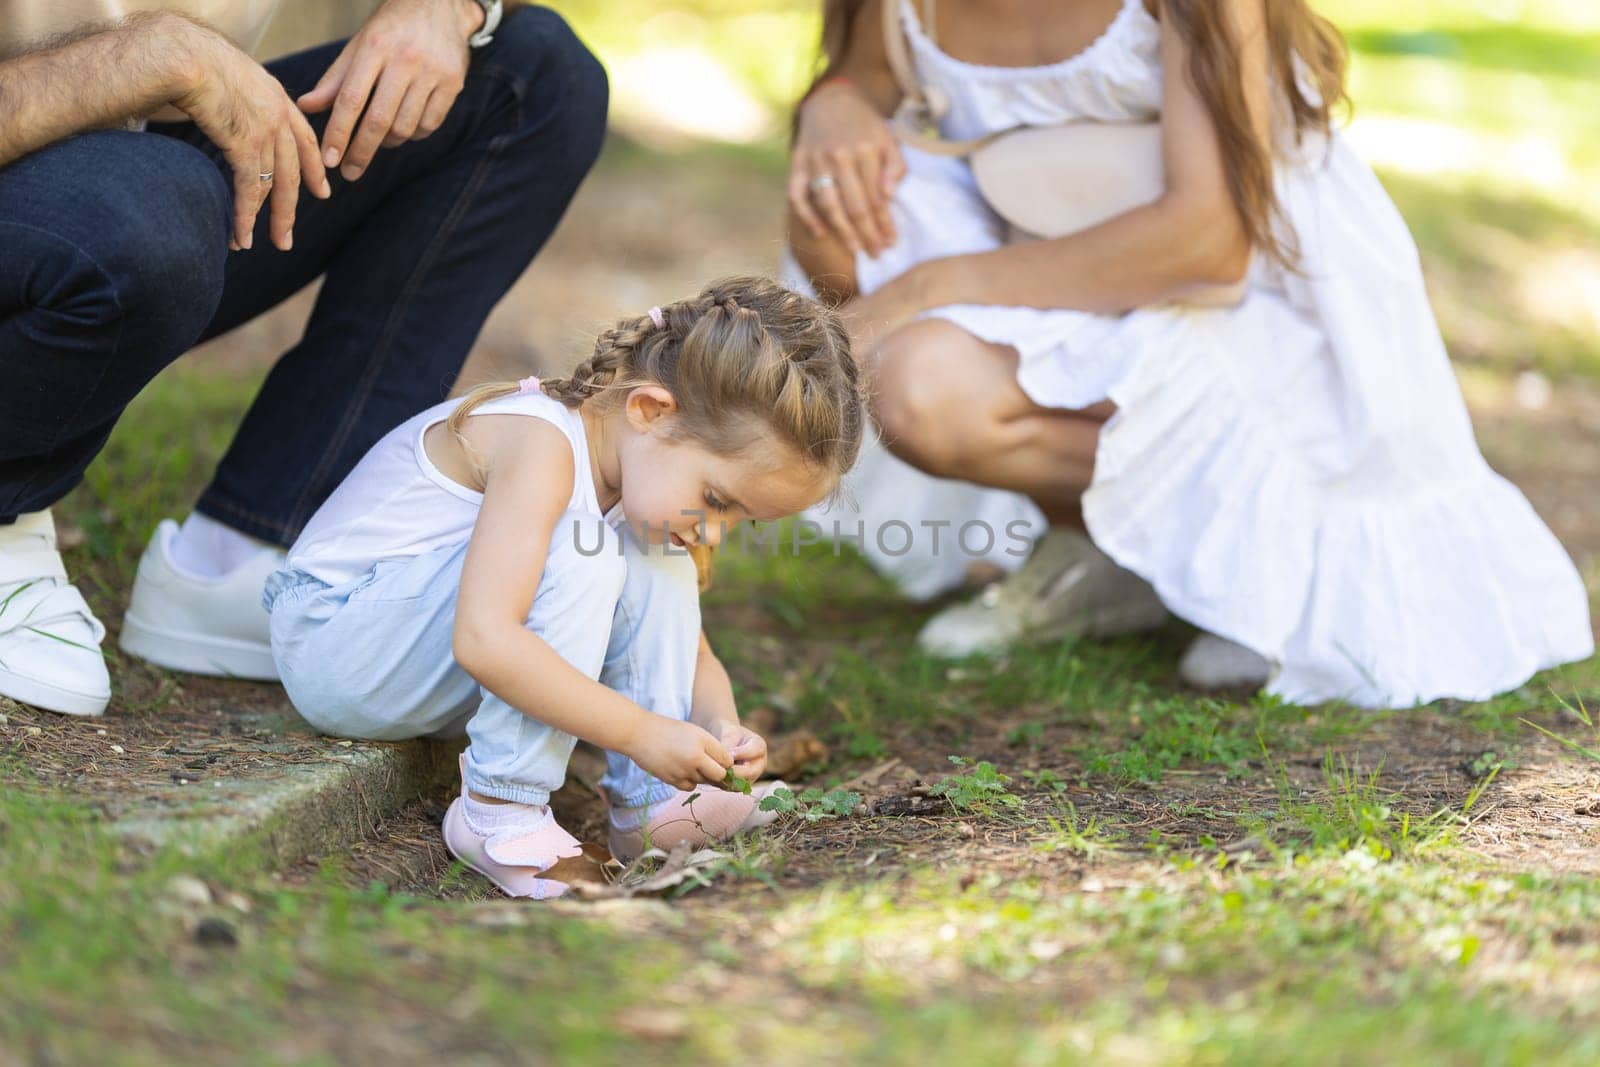 Family in park - a little girl looking down on the grass and her parents watching her by Studia72